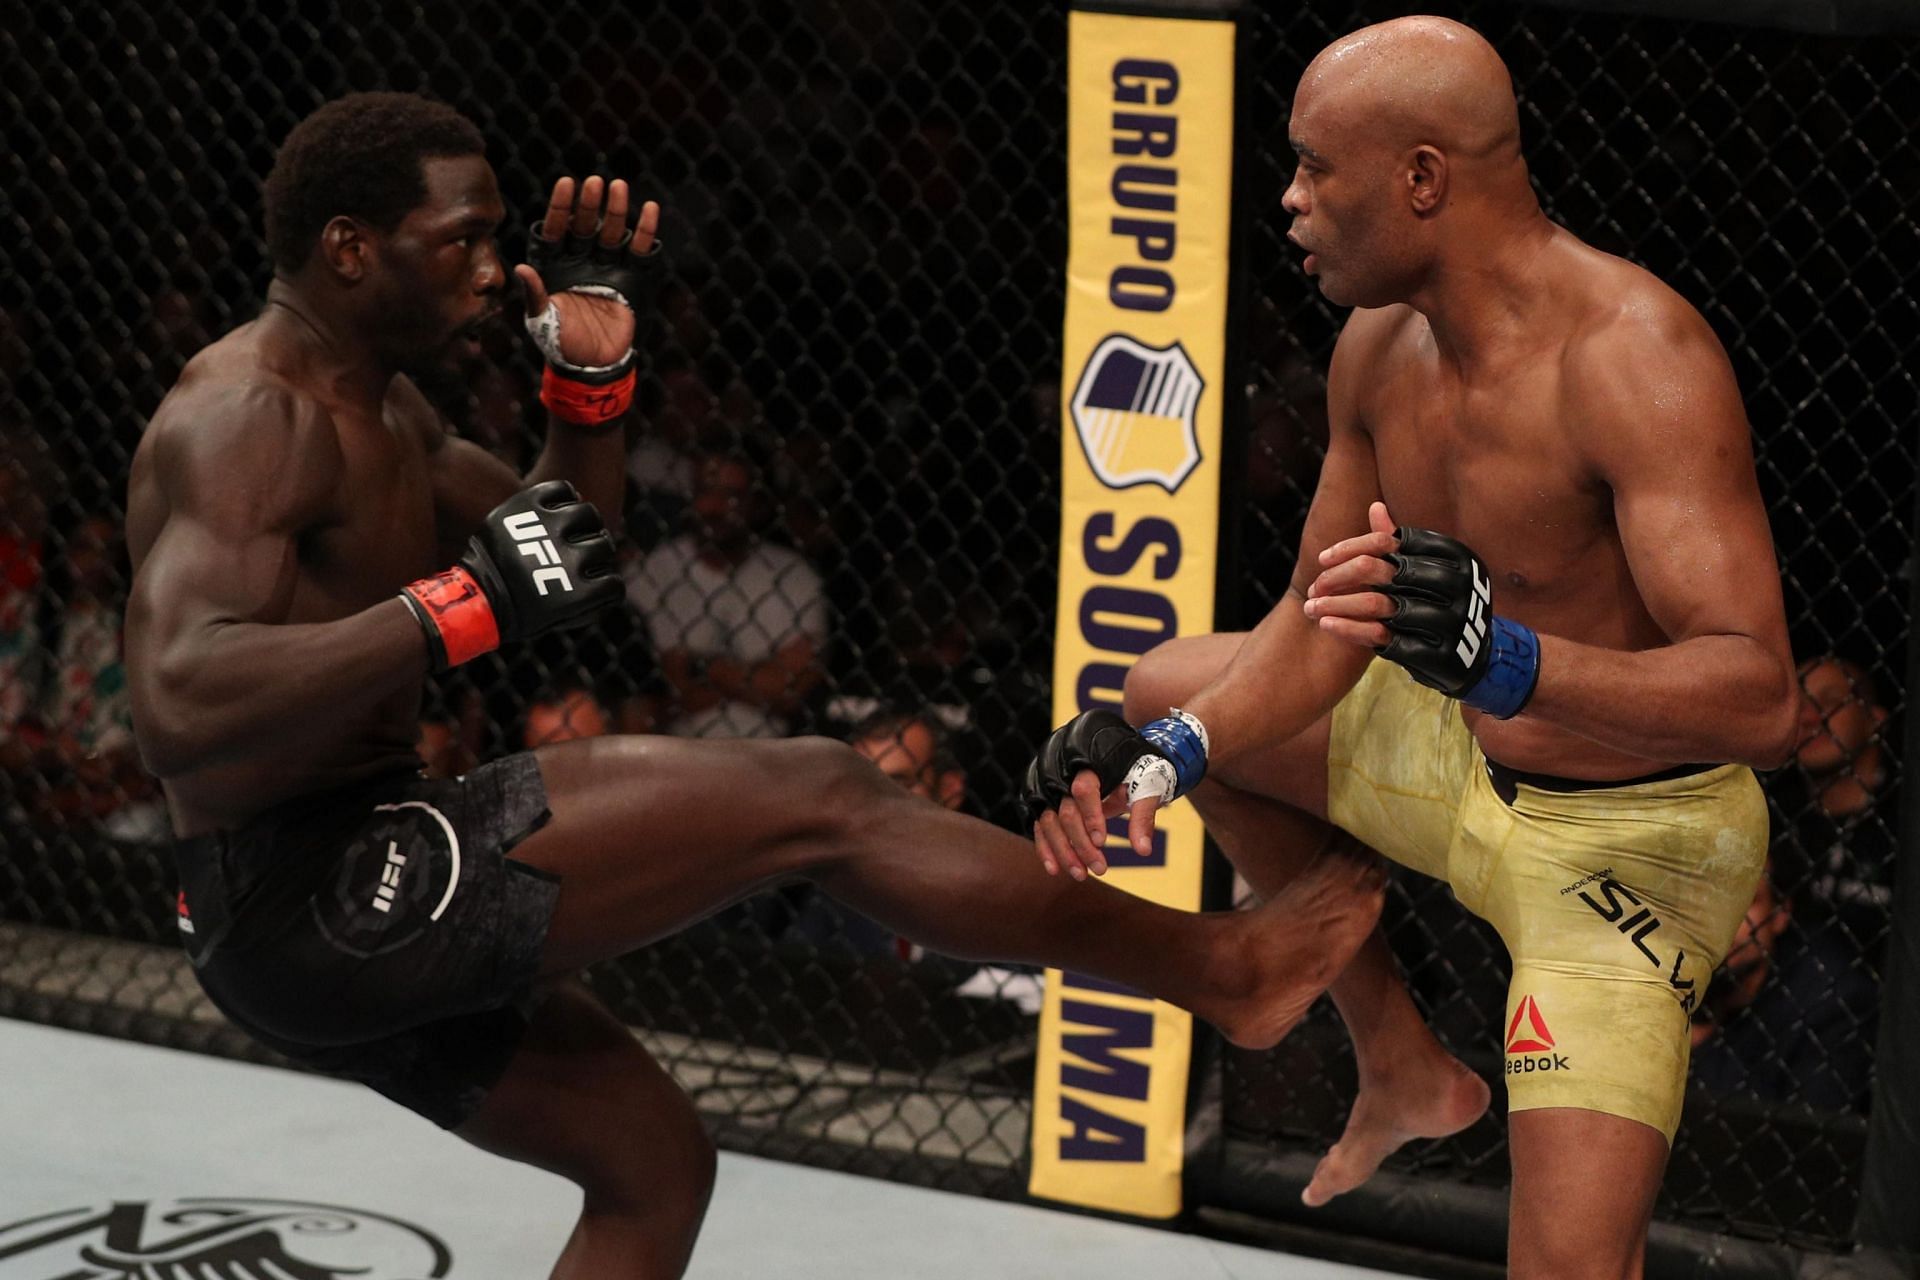 Jared Cannonier used leg kicks to defeat Anderson Silva when they fought